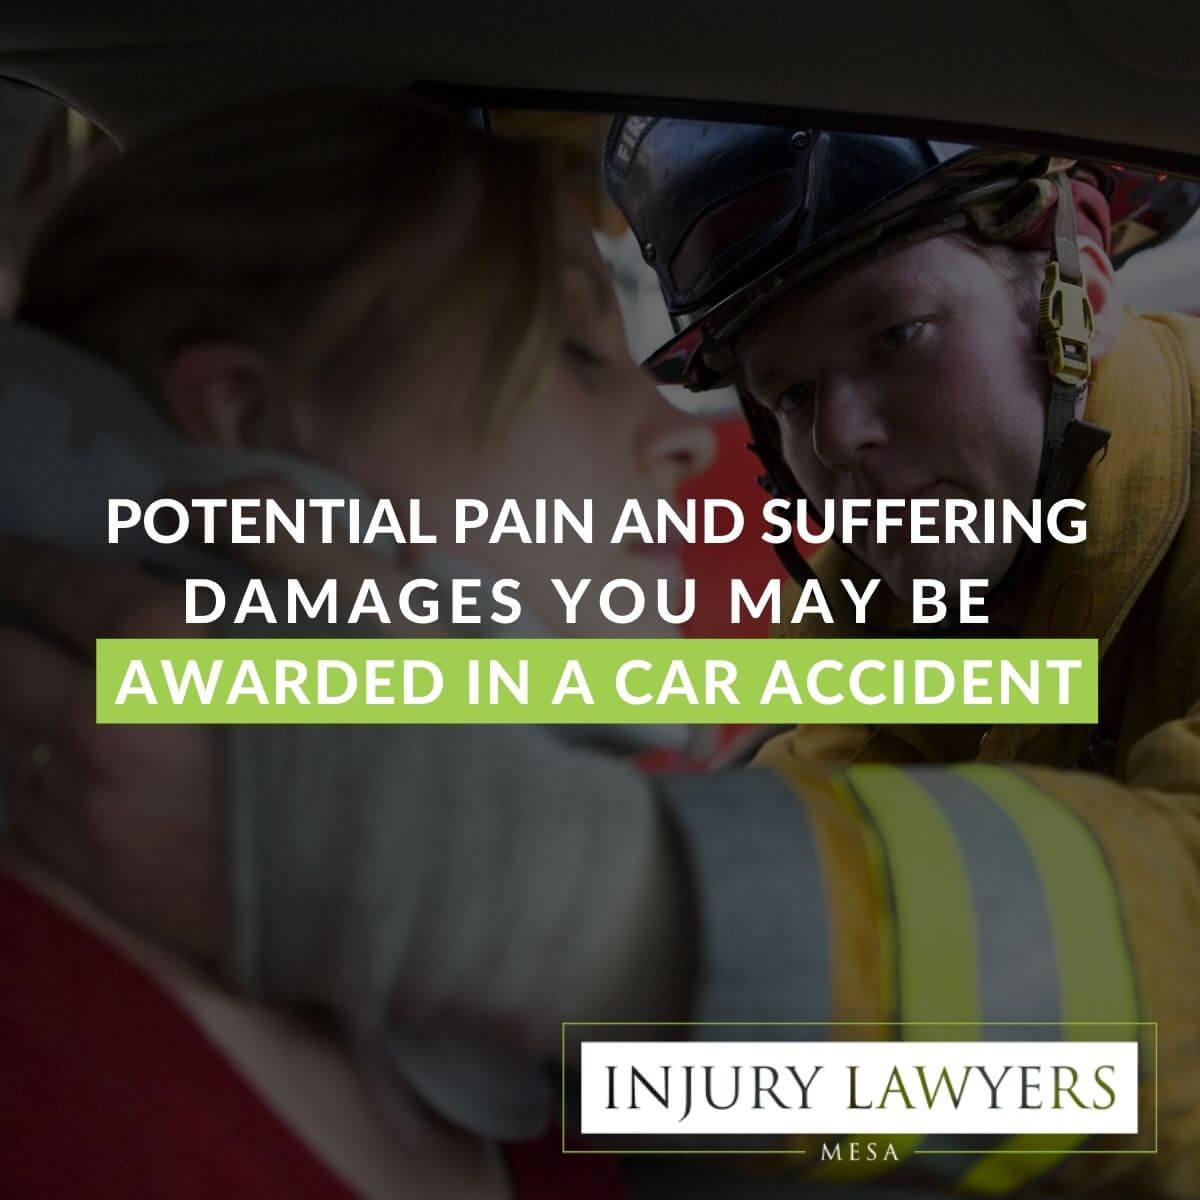 Potential Pain and Suffering Damages You May be Awarded in a Car Accident